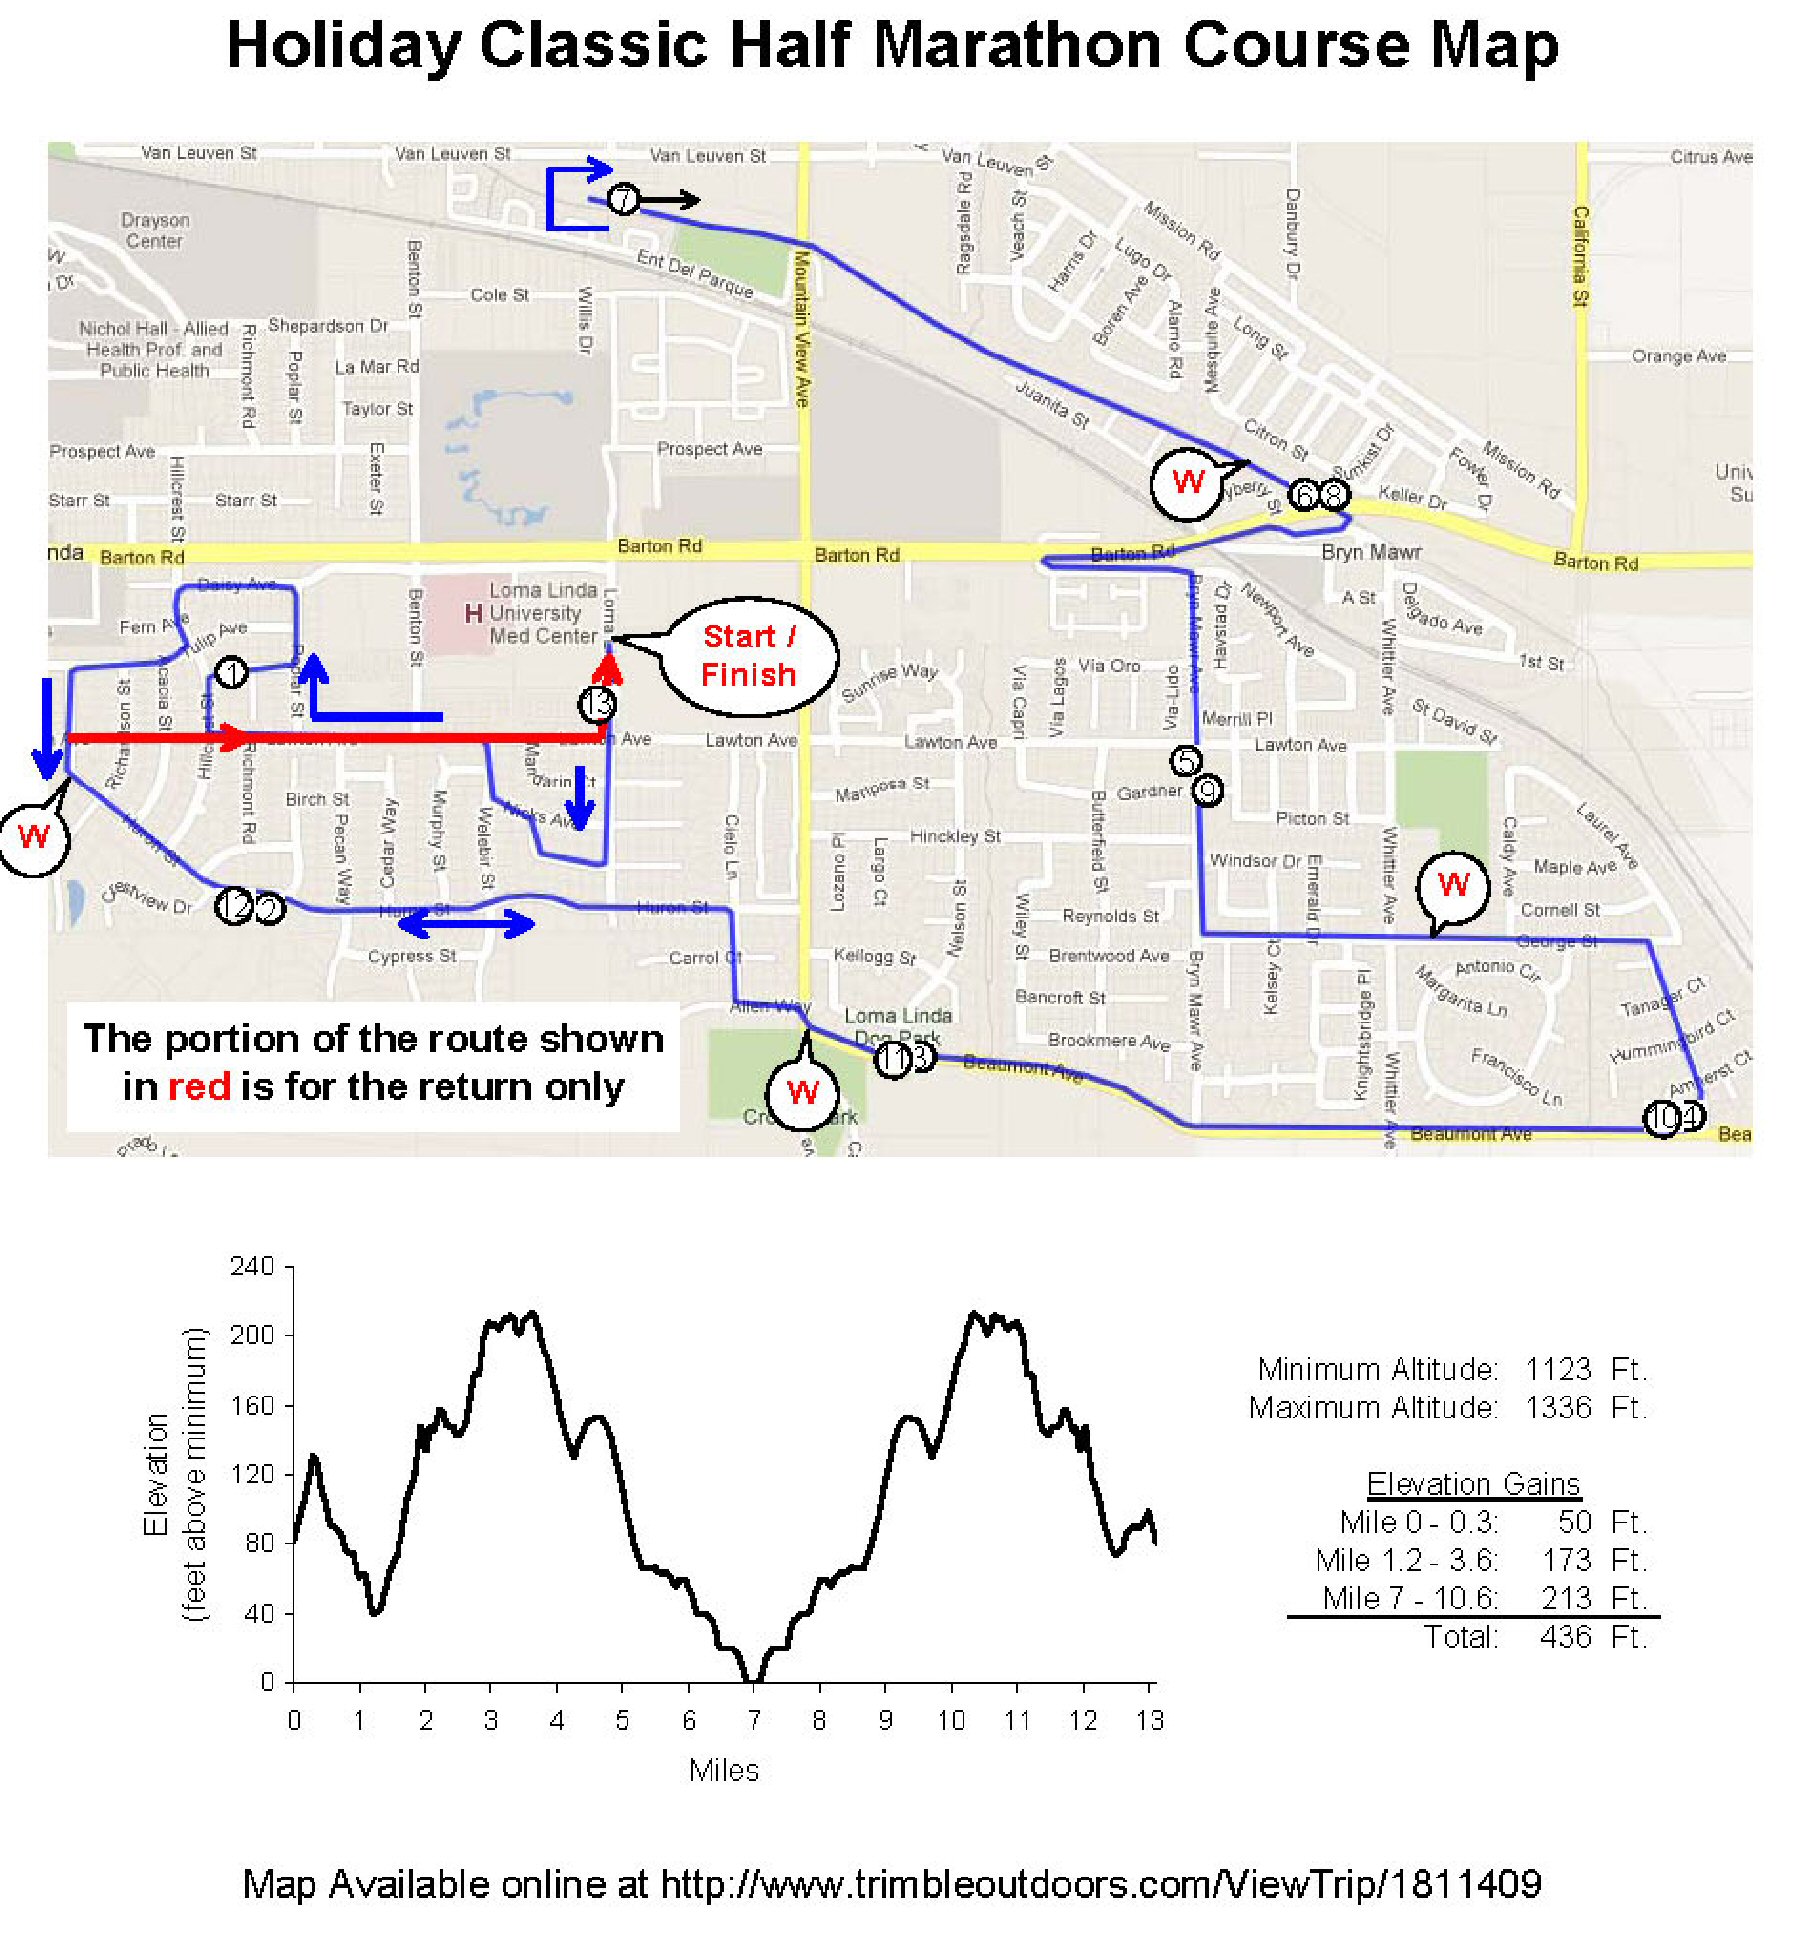 25th Annual Holiday Classic Half-Marathon Course Map and elevations